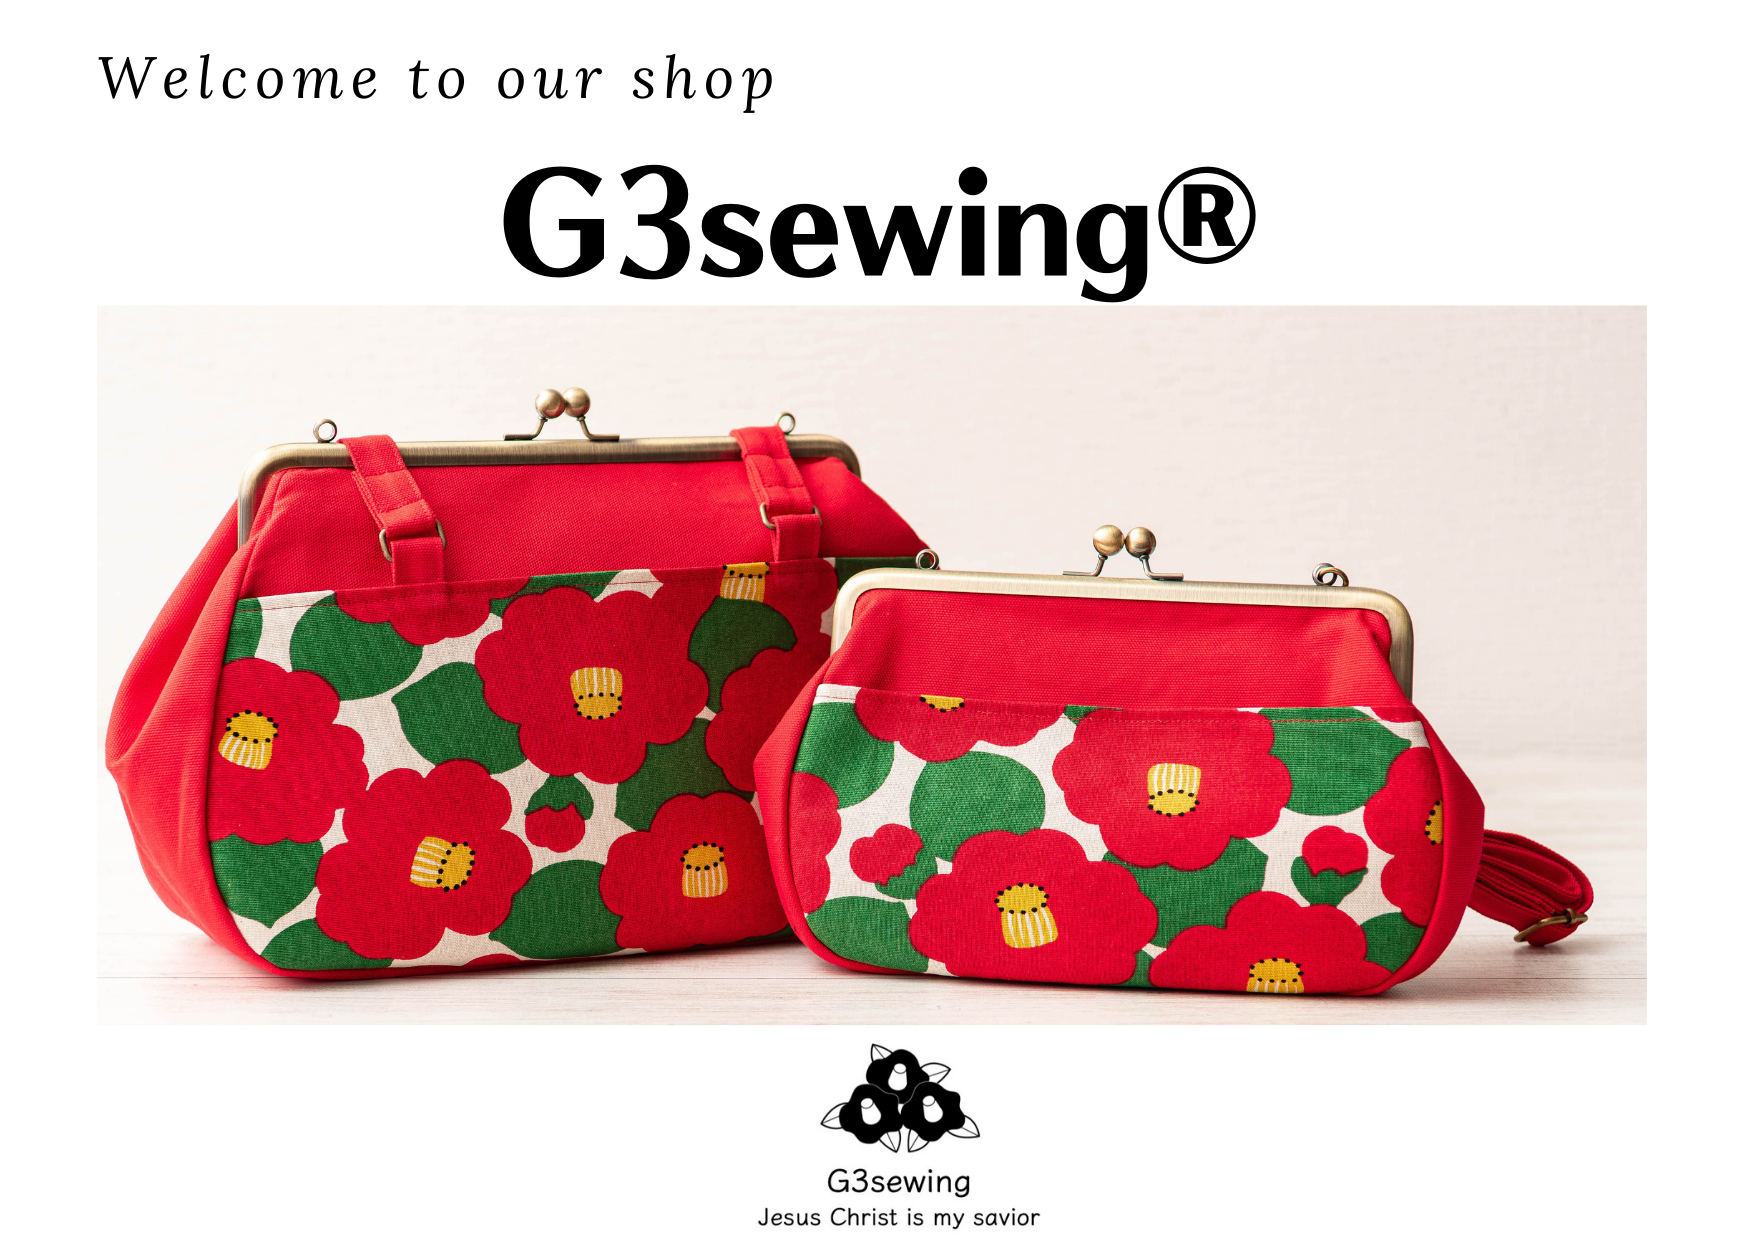 G3sewing